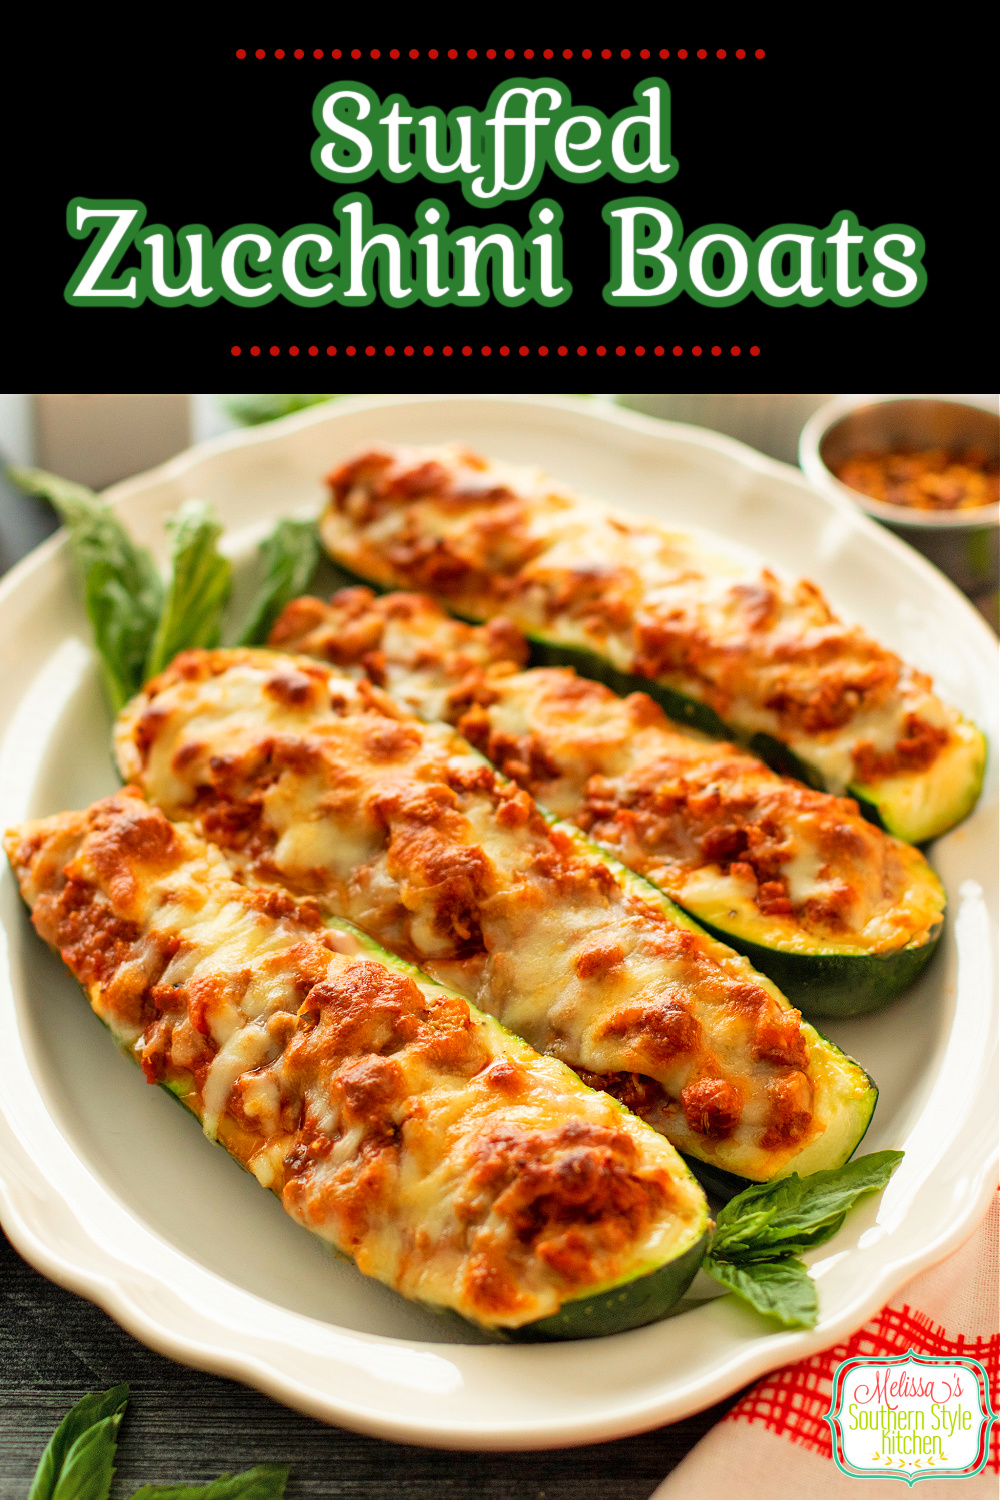 These Italian sausage Stuffed Zucchini Boats are a delicious way to serve whole fresh zucchini as an entrée #stuffedzucchini #stuffedzucchiniboats #Italiazucchini #bakedzucchini #lowcarbzucchinirecipes #ketozucchinirecipes #bestzucchiniboatsrecipe via @melissasssk